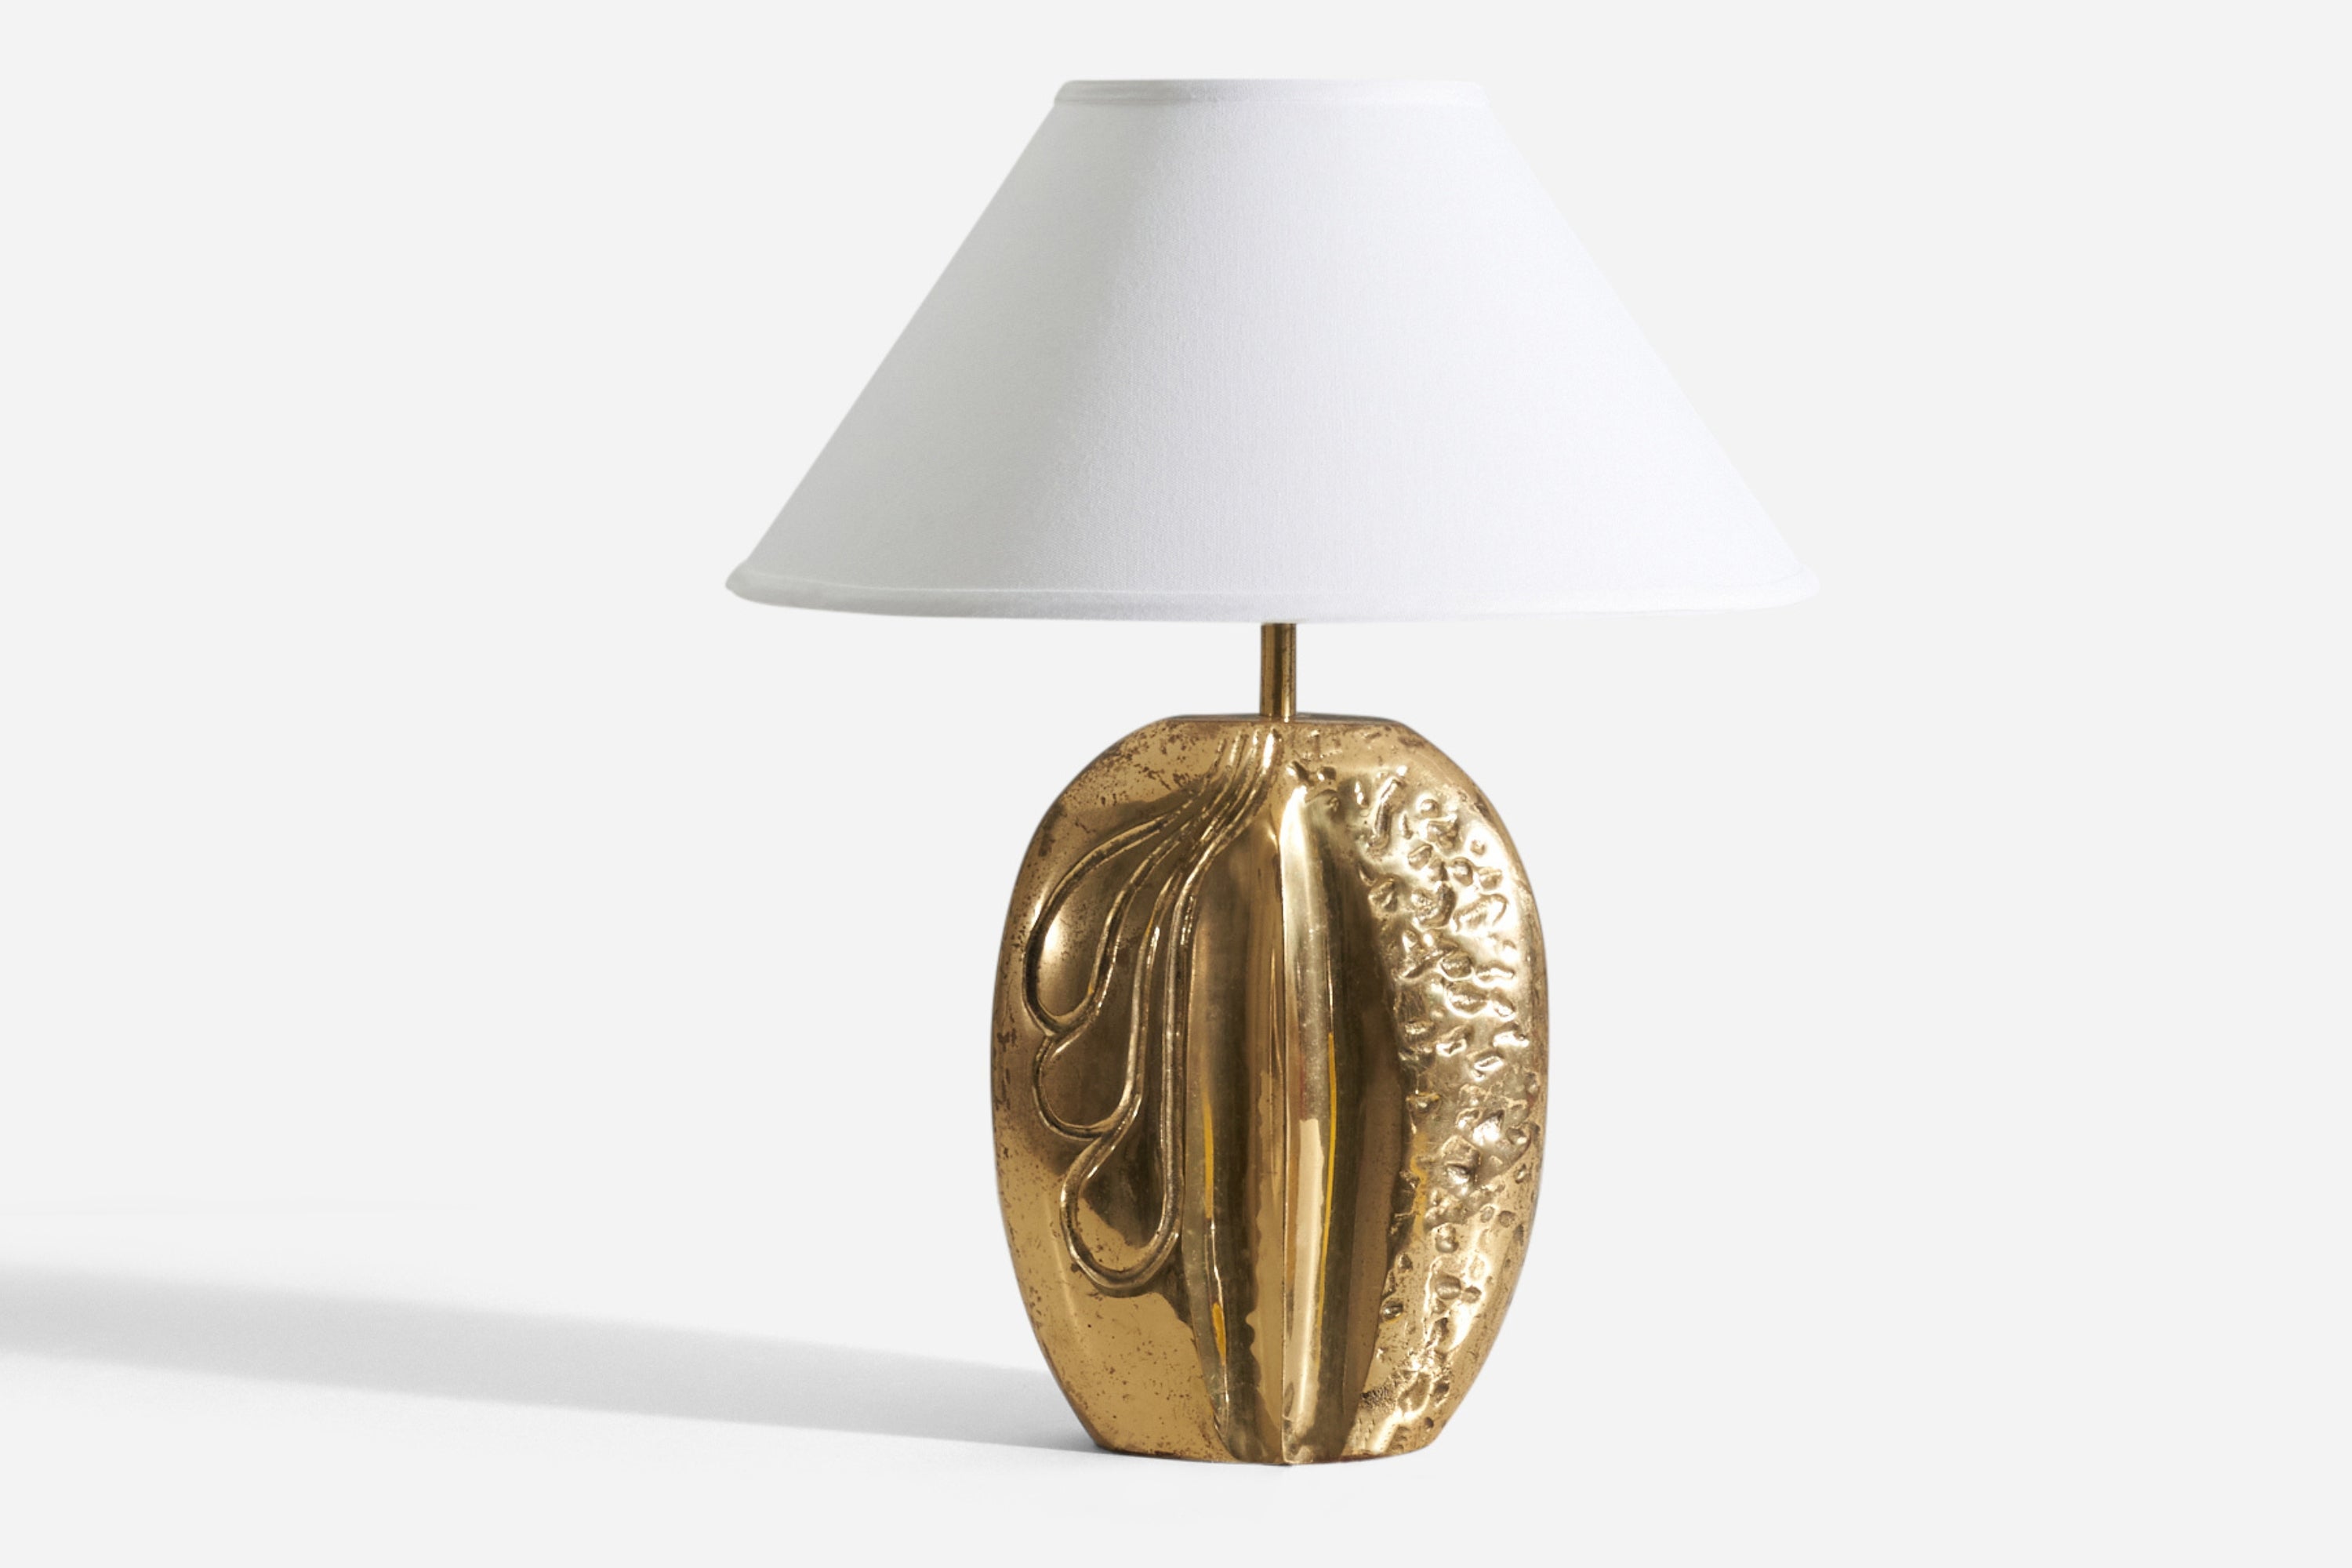 Italian, Modernist Table Lamp, Gold-Plated Brass, Fabric, Italy, 1960s